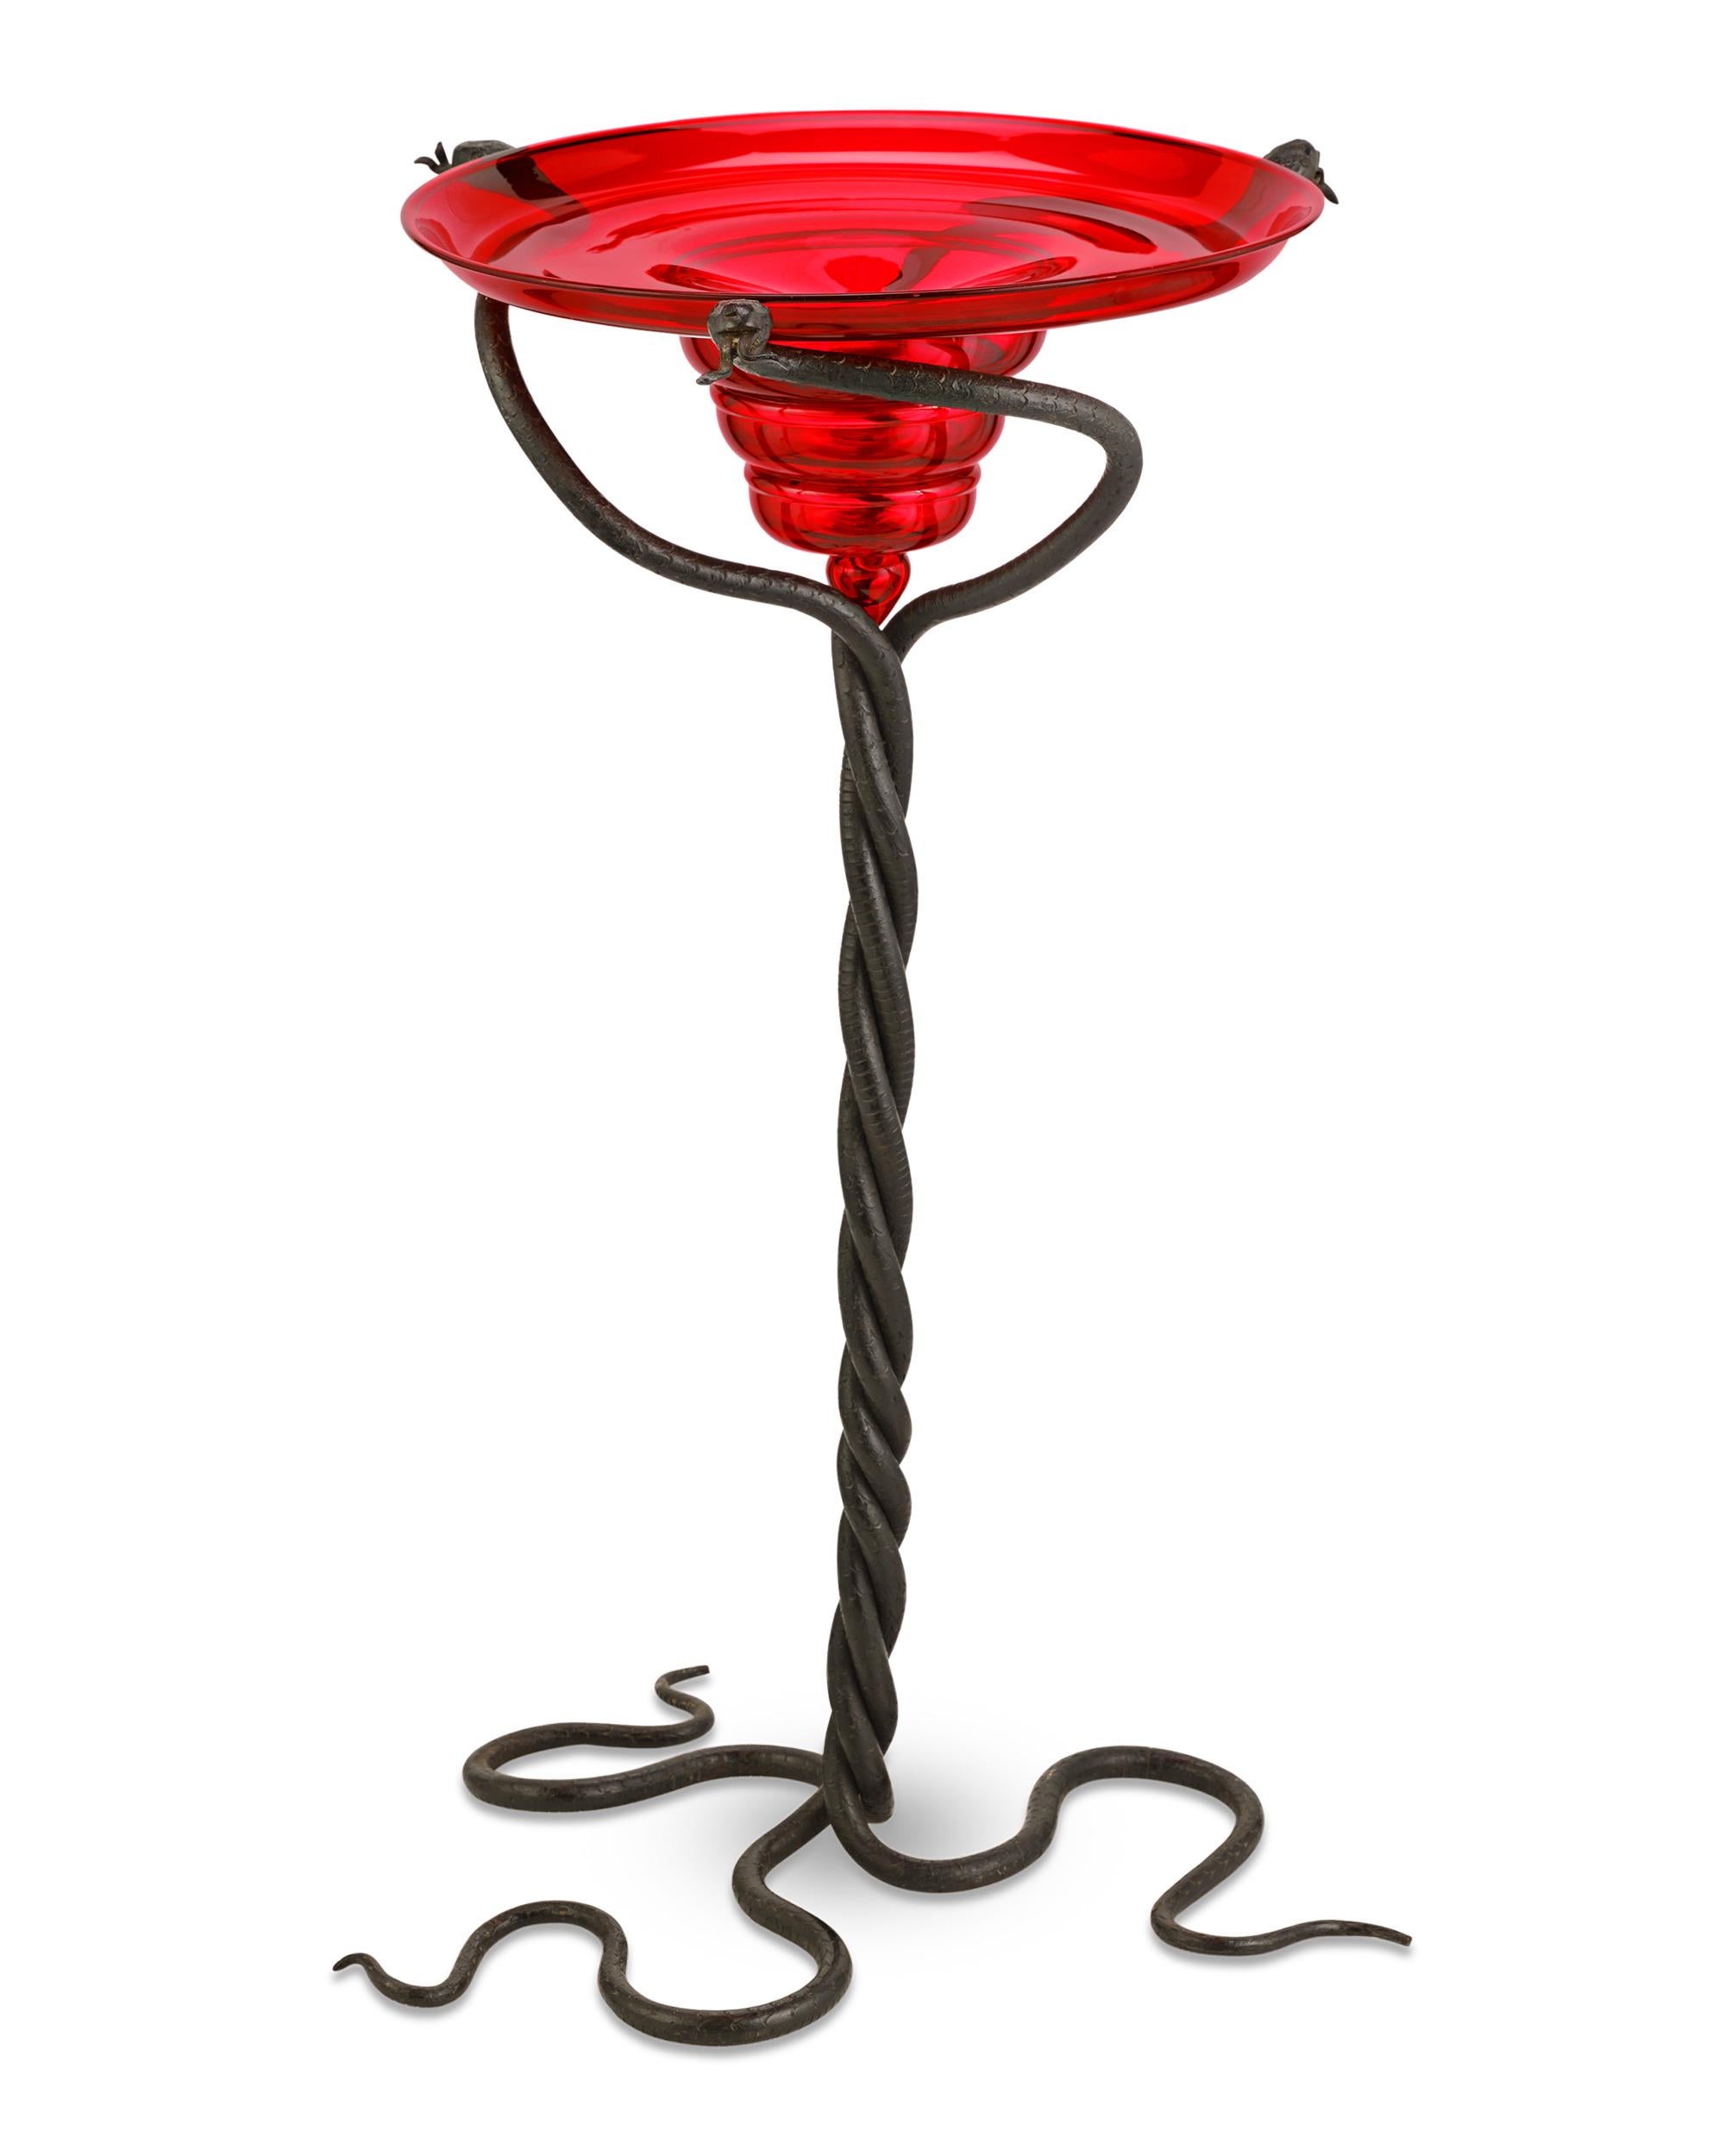 This bold and unique serpentiform pedestal table is the work of renowned Italian artisan Umberto Bellotto. The creative design twists three slithering snake-shaped wrought-iron rods together to form a supportive base for an eye-catching red Venetian